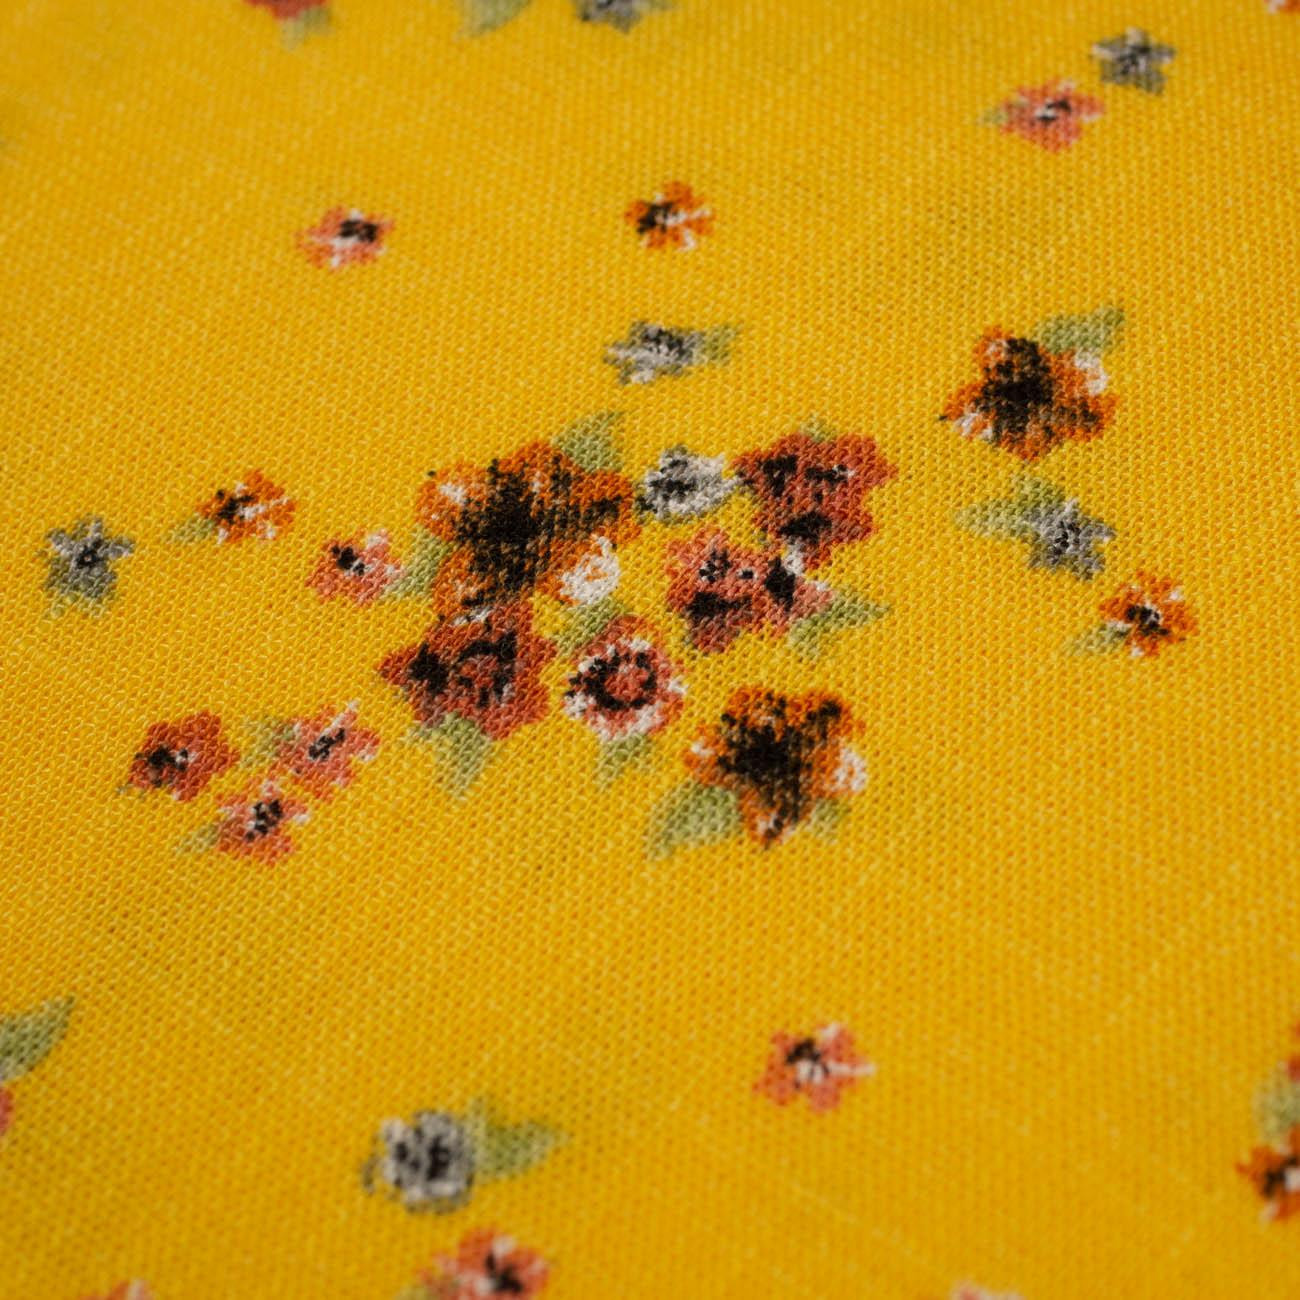 SMALL FLOWERS / mustard - Viscose with linen weave